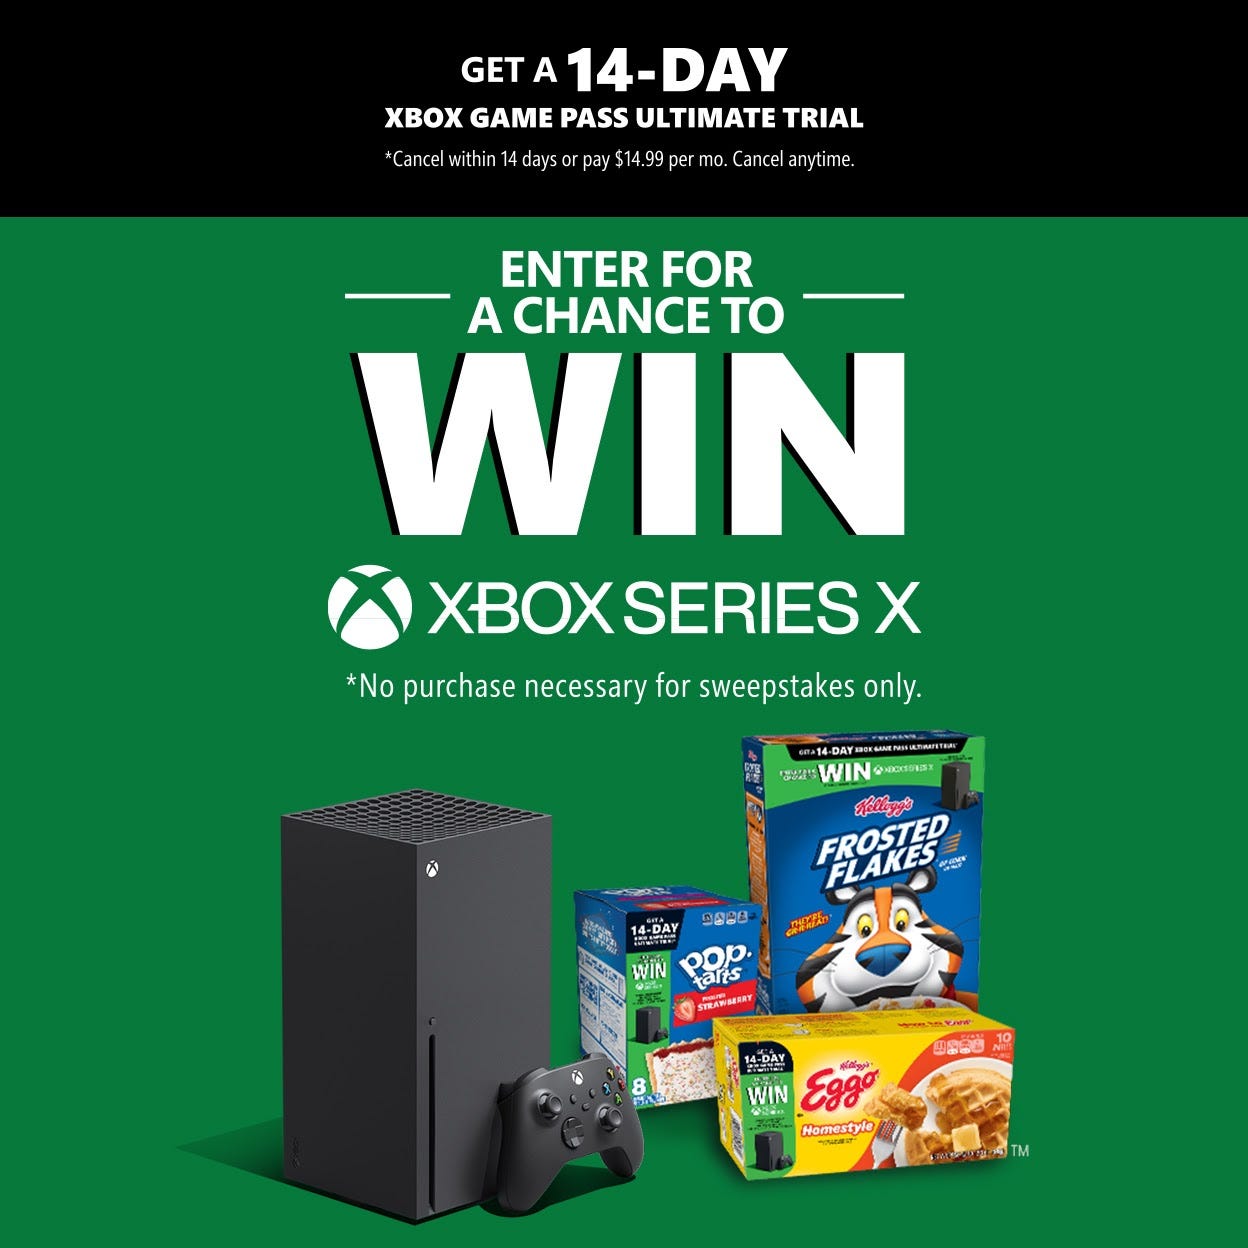 Xbox and Taco Bell Team Up Once More to Giveaway Free Consoles